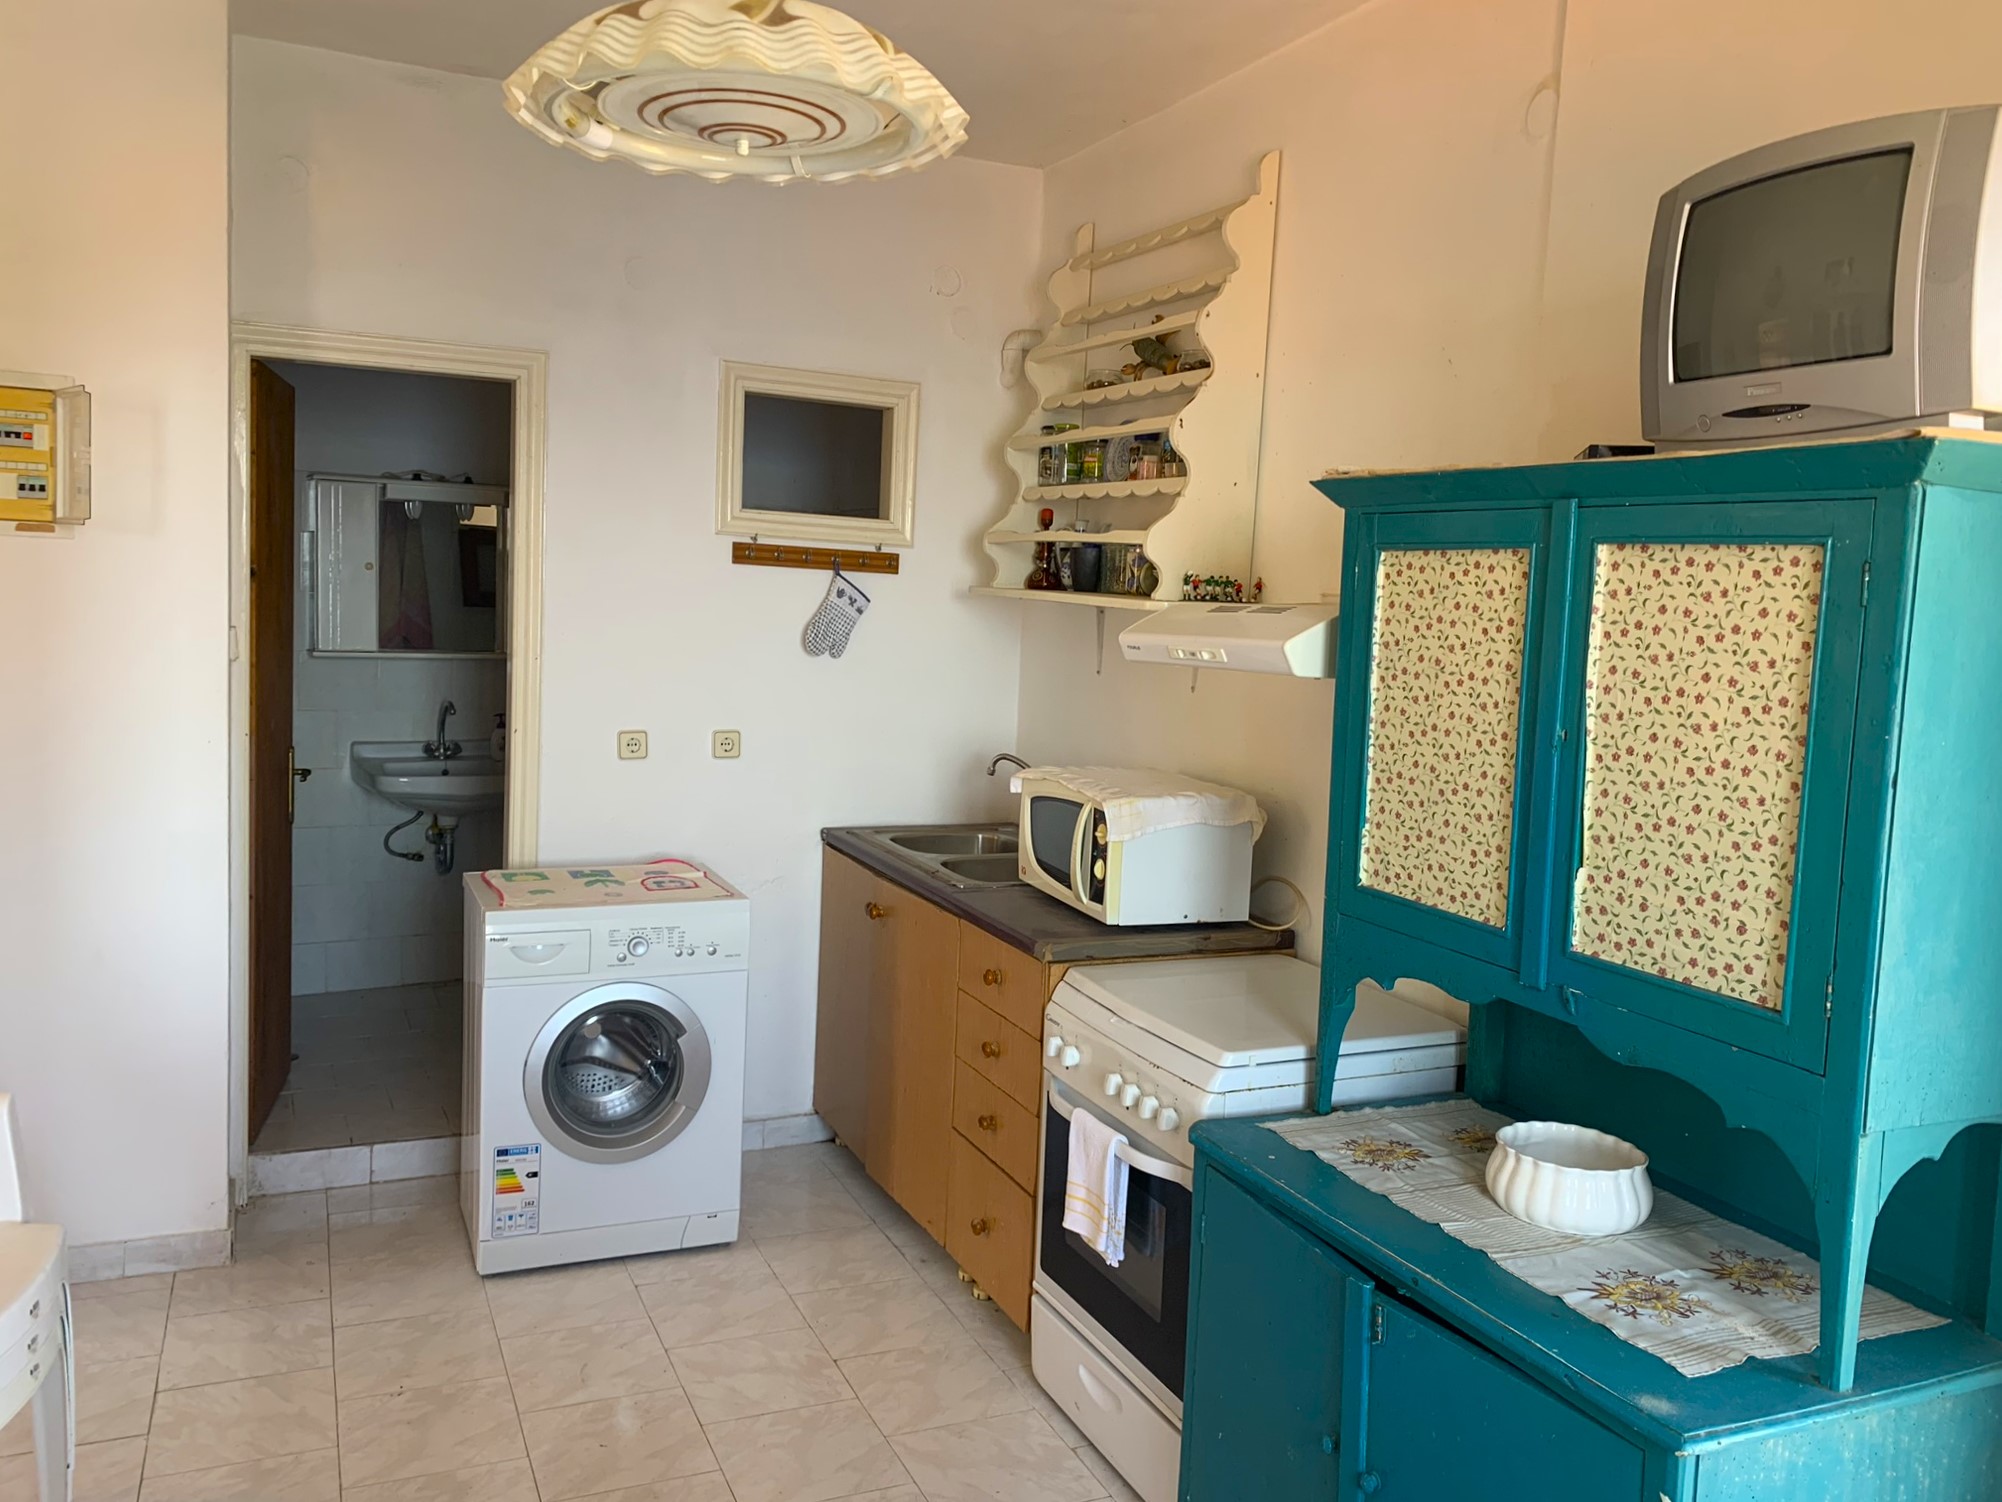 Kitchen area of house for sale on Ithaca Greece, Kioni